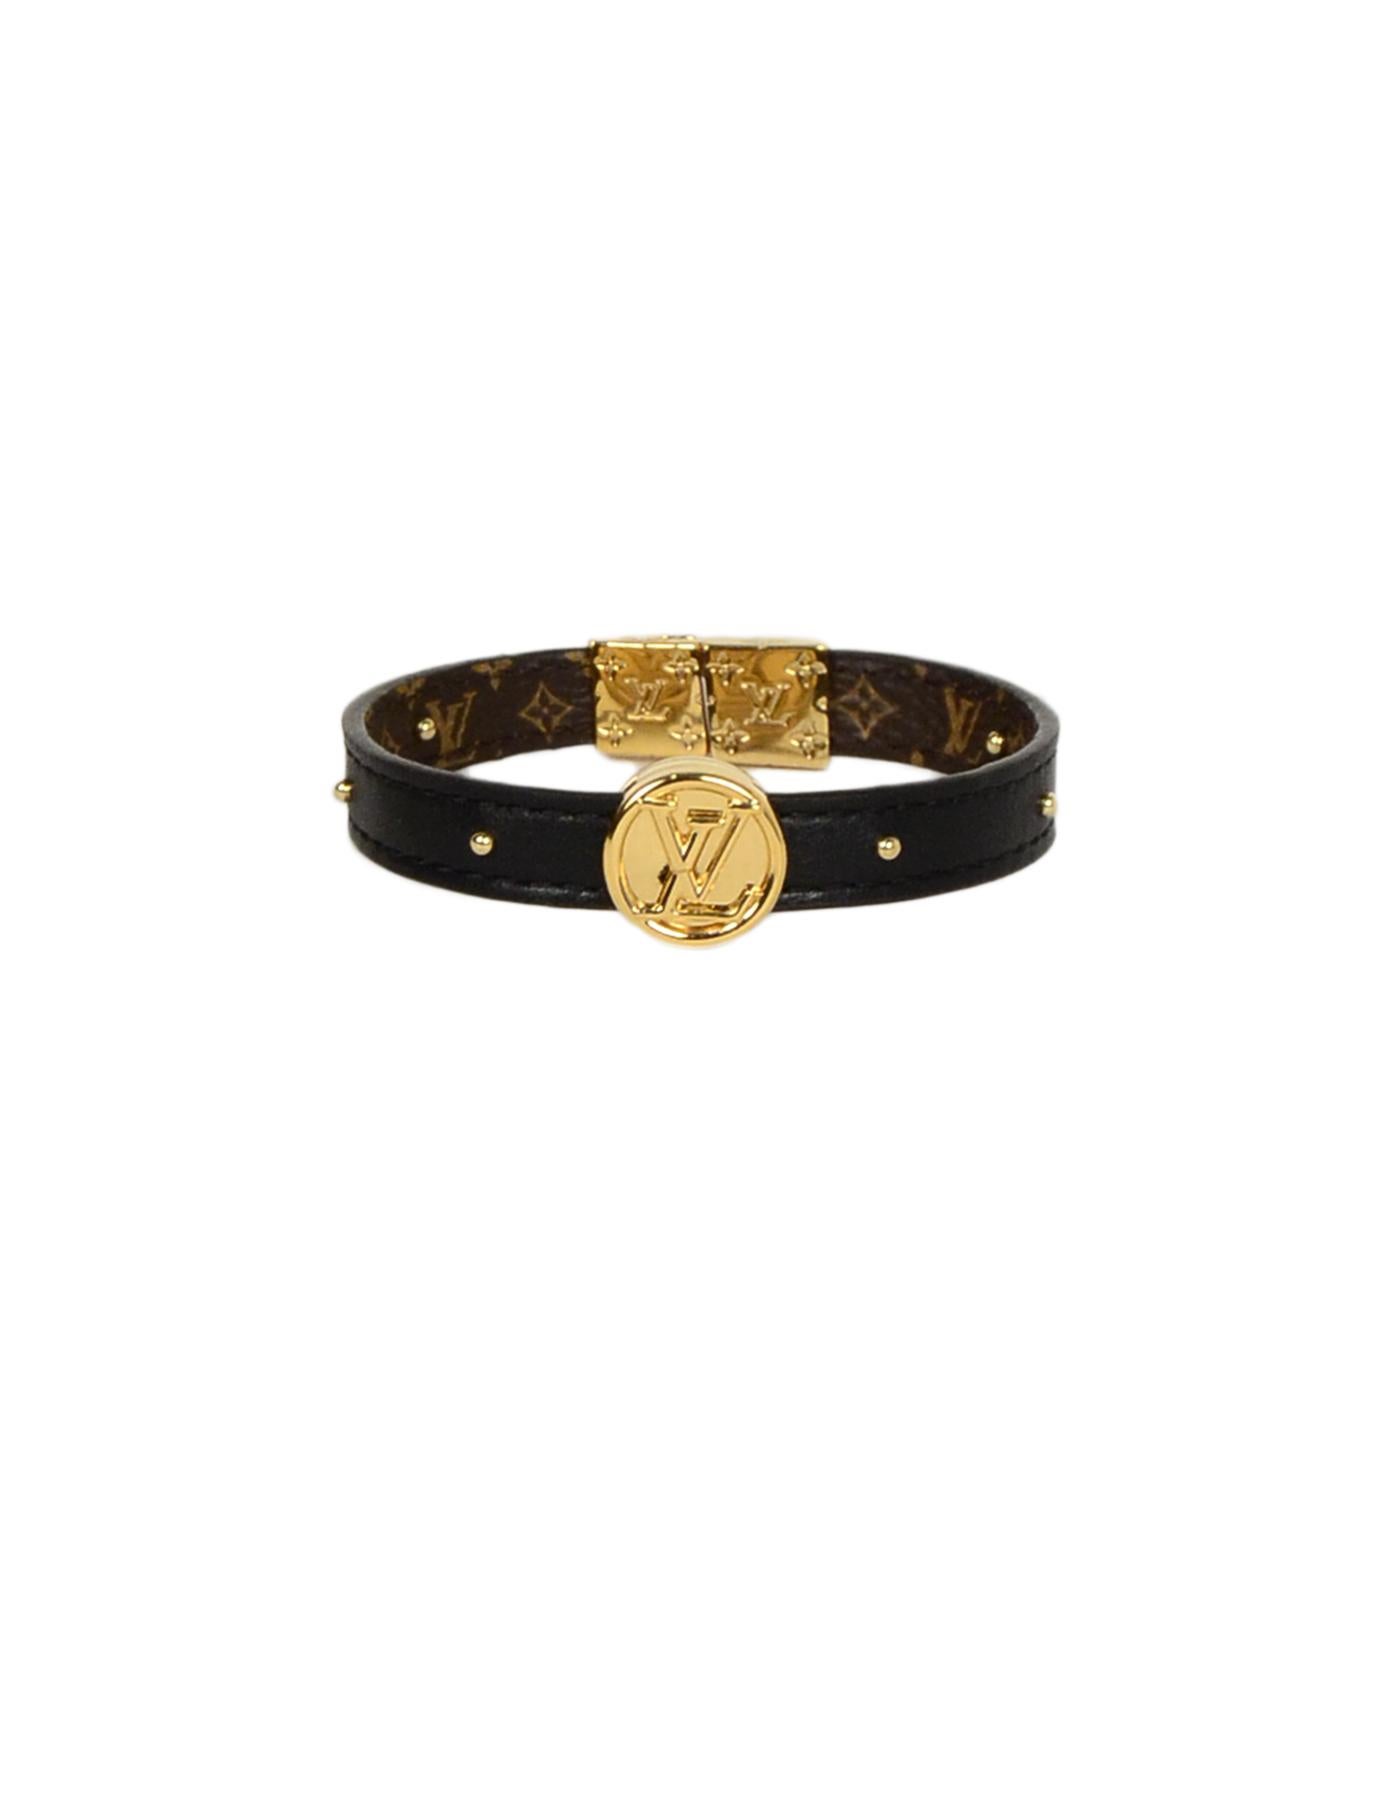 Louis Vuitton Monogram/Noir Black Circle Logo Reversible Studded Bracelet 
Made In: Spain
Color: Brown
Materials: Coated canvas, metal
Hallmarks: BC 0198
Closure/Opening: Clasp closure
Overall Condition: New
Estimated Retail: $515 + tax
Includes: